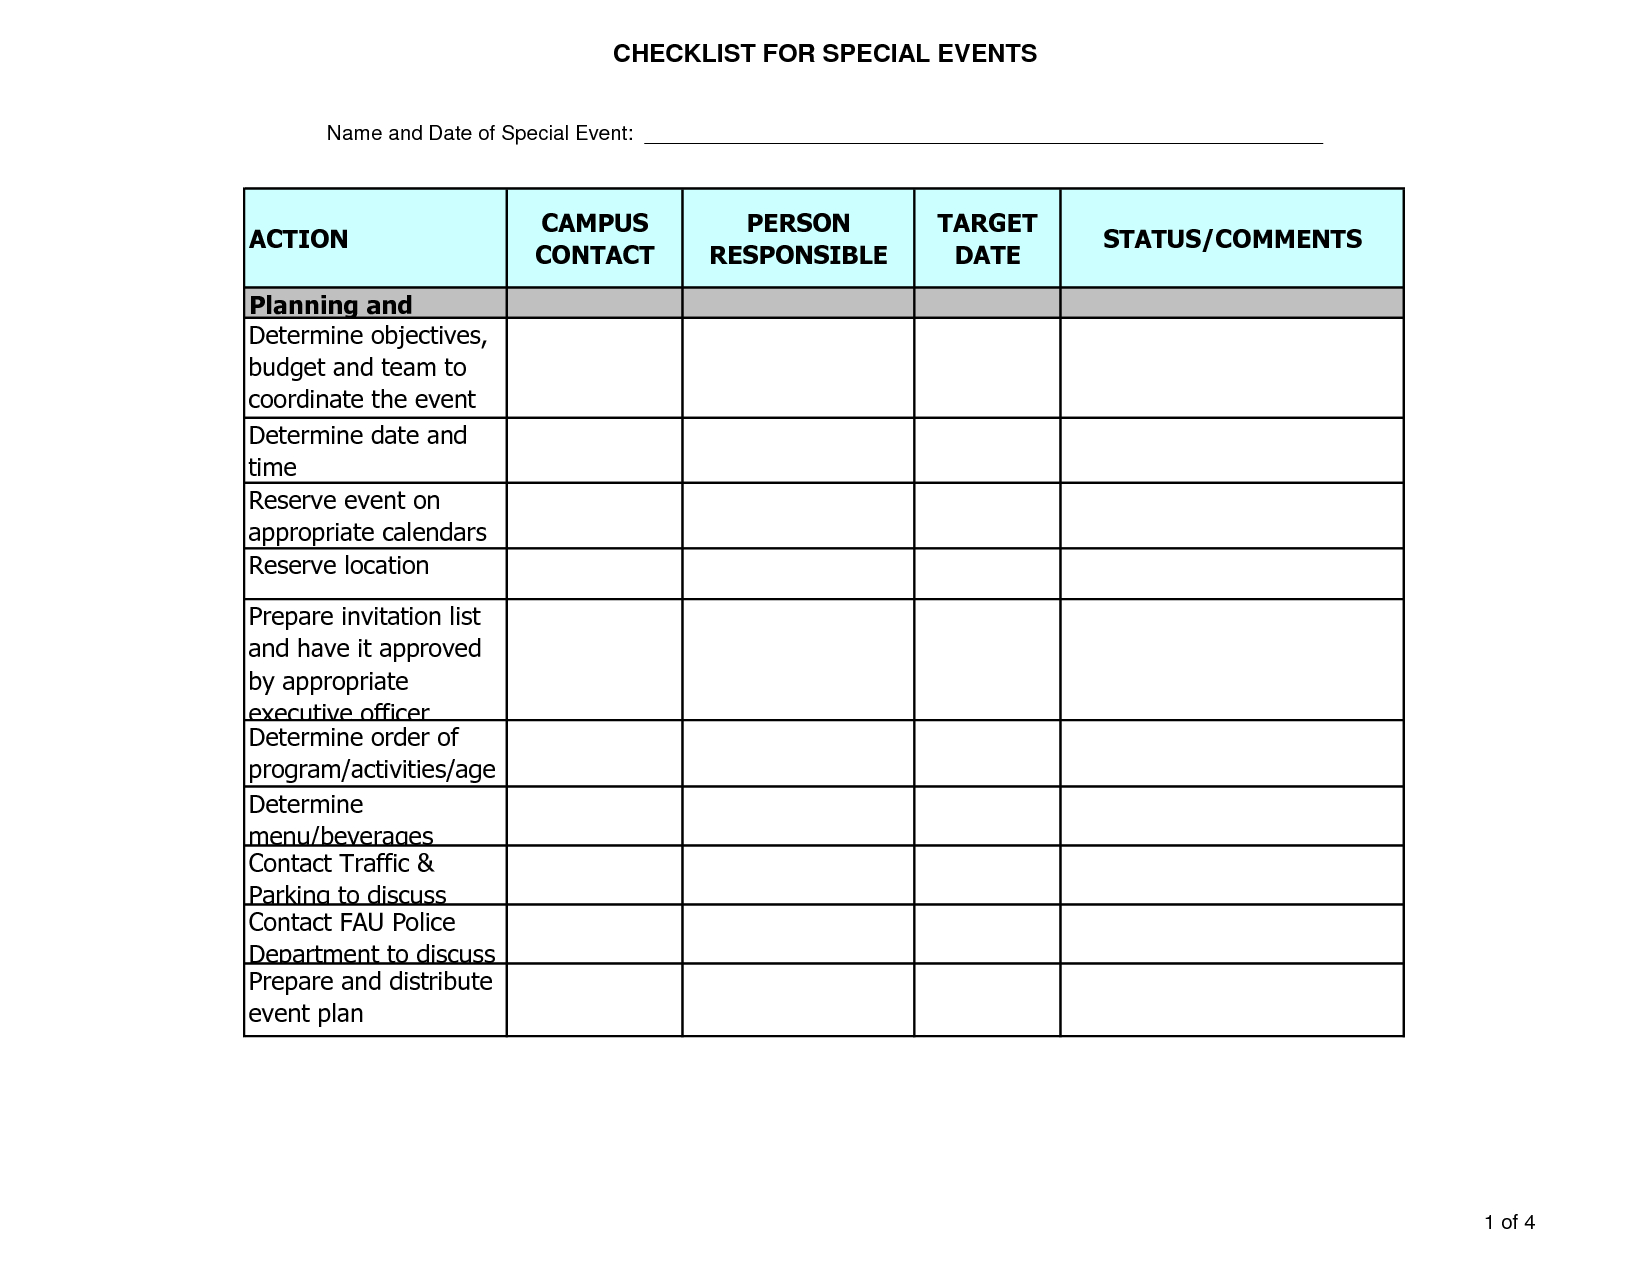 Business Continuity Plan Template  Business Continuity Plan  For Corporate Event Planning Checklist Template With Regard To Corporate Event Planning Checklist Template